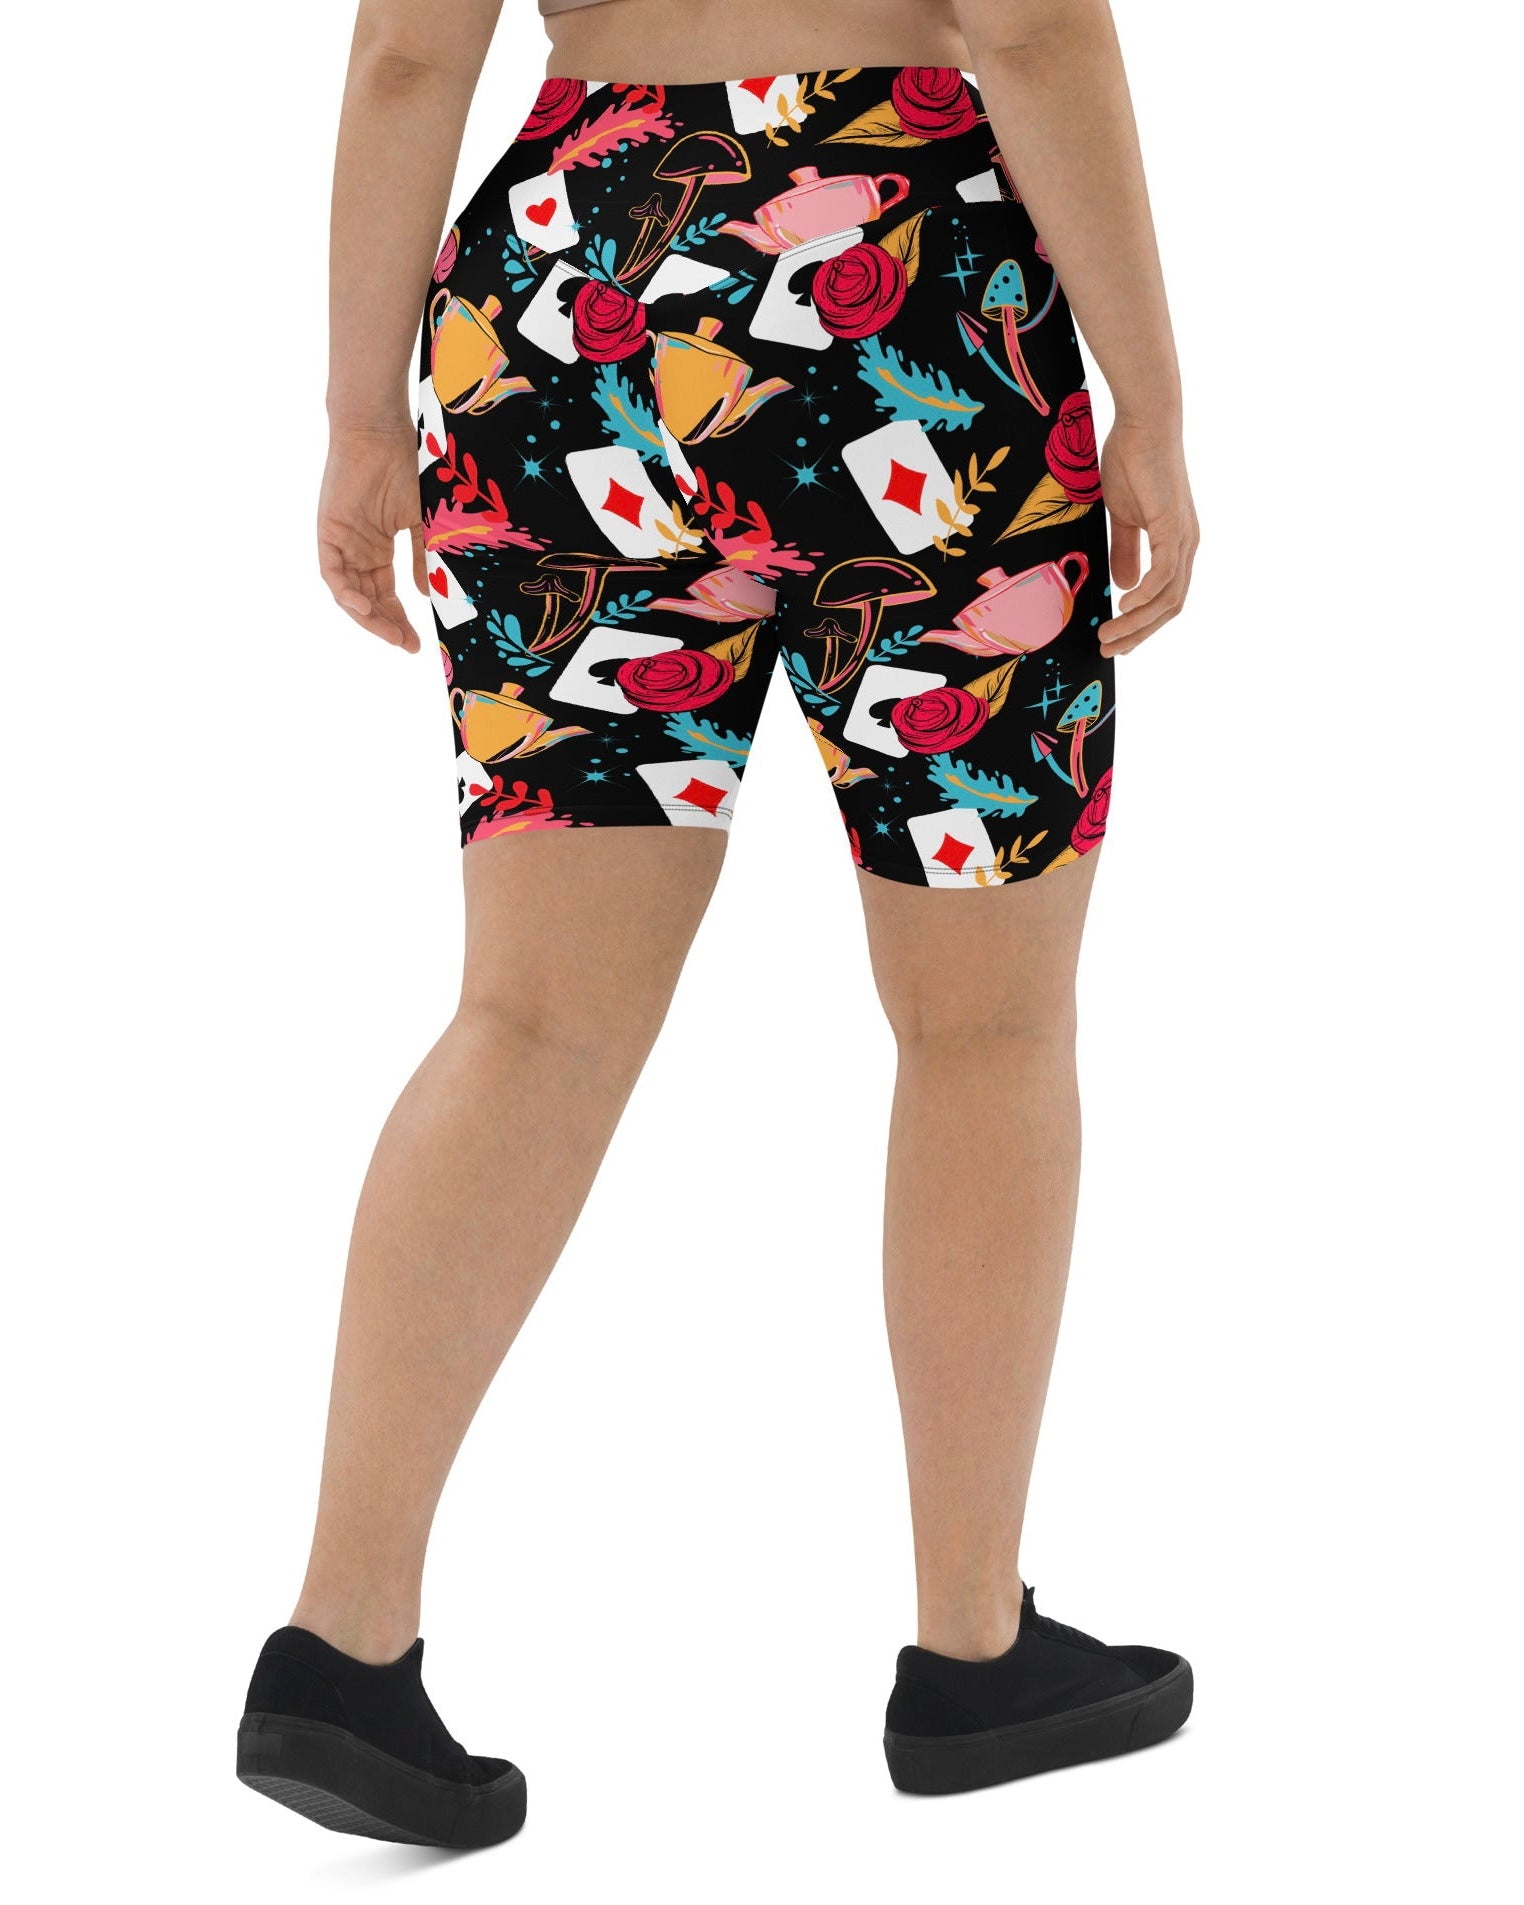 Curiouser and Curiouser Biker Shorts, Biker Shorts, - One Stop Rave